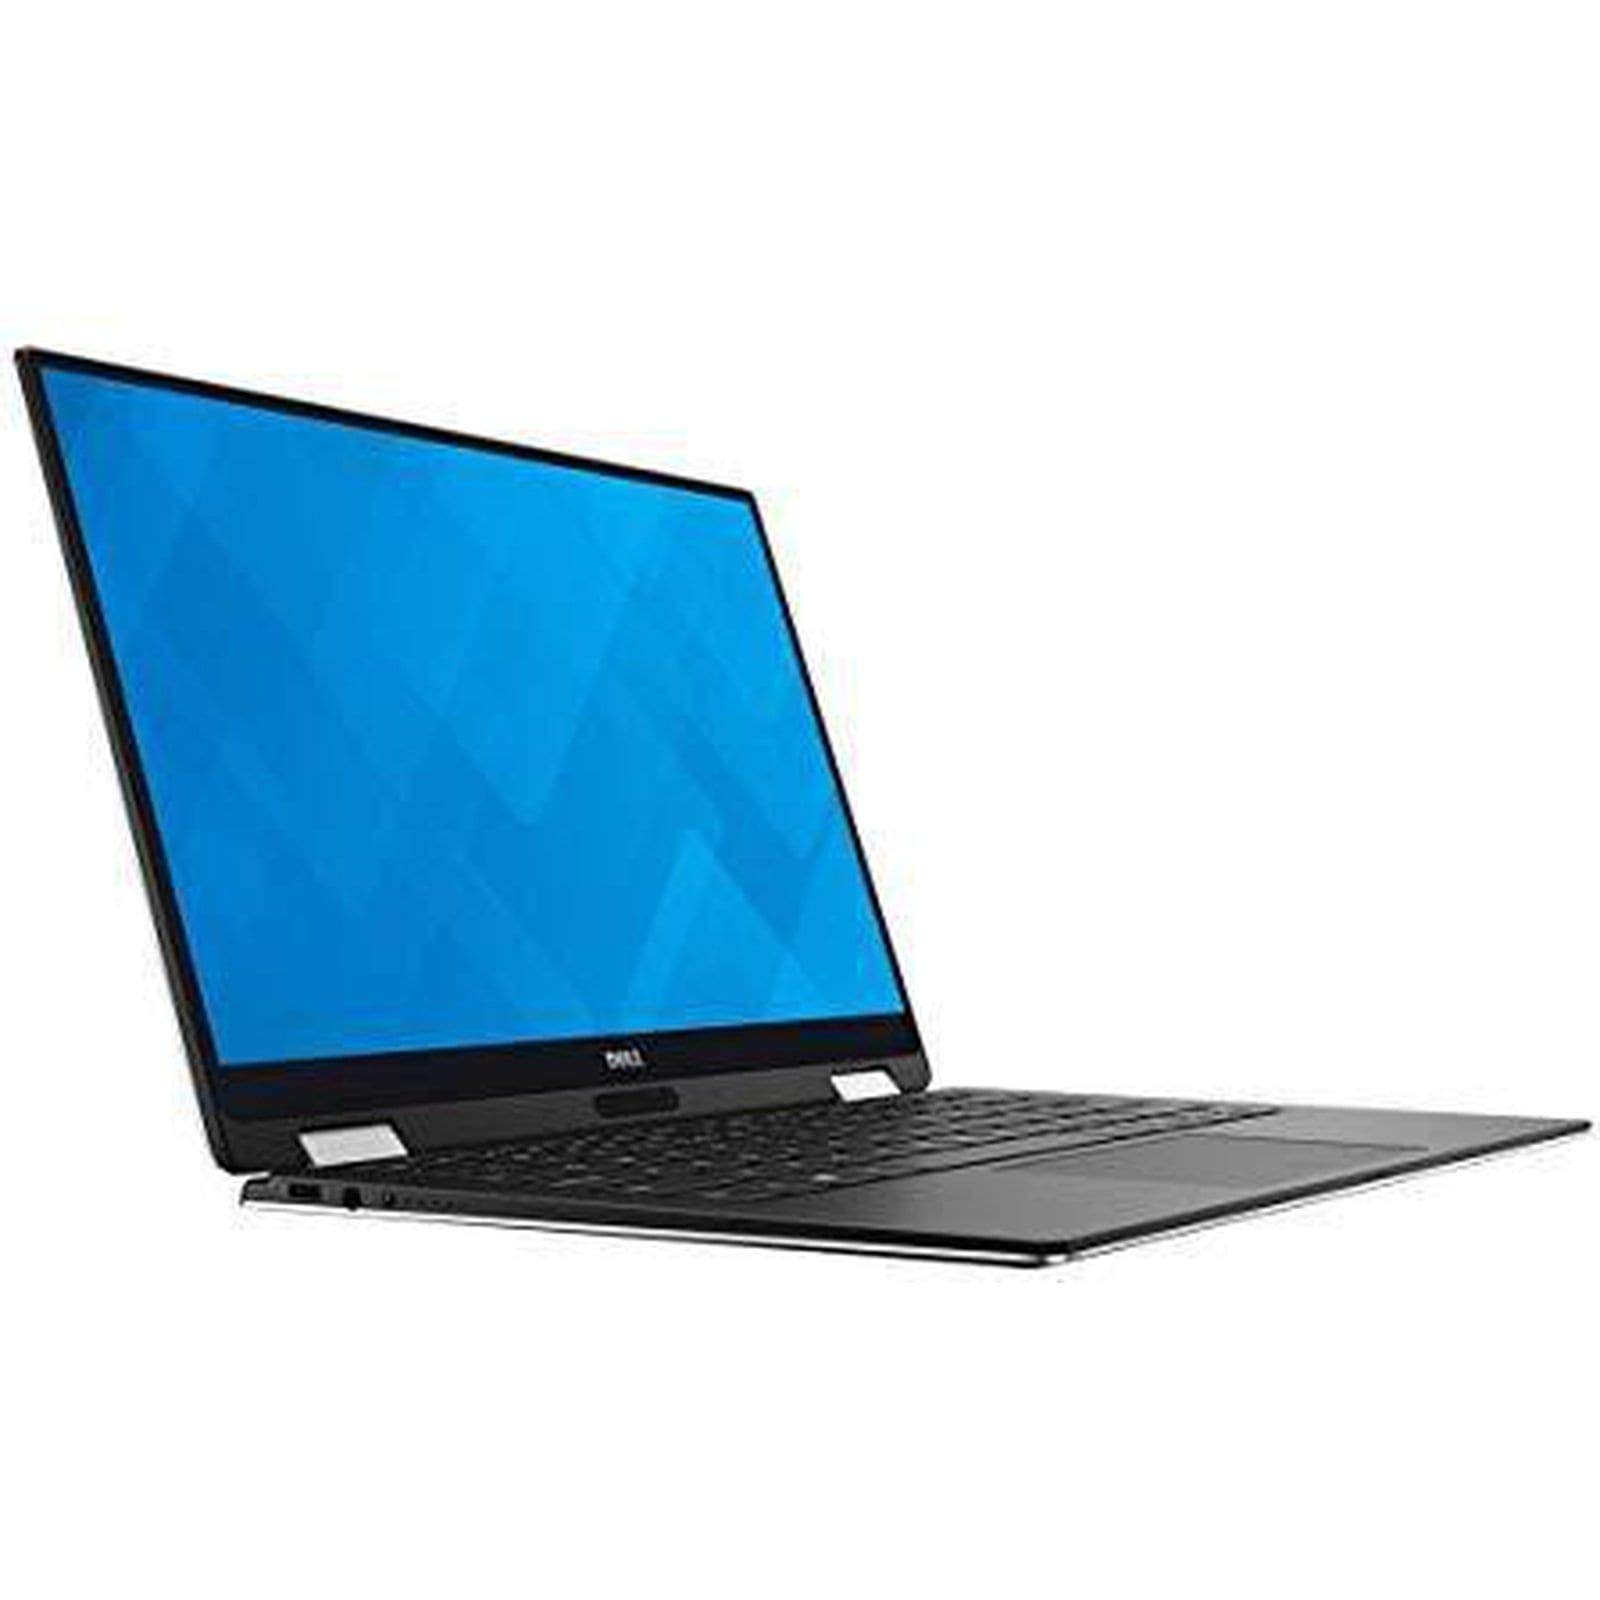 Newest Dell XPS 9365 QHD+ (3200 x 1800) Touch Screen 2-in-1 Laptop Notebook Convertible Tablet PC (Intel Core i7-7Y75, 16GB Ram, 512GB SSD, Camera, WiFi) Windows 10 (Renewed)